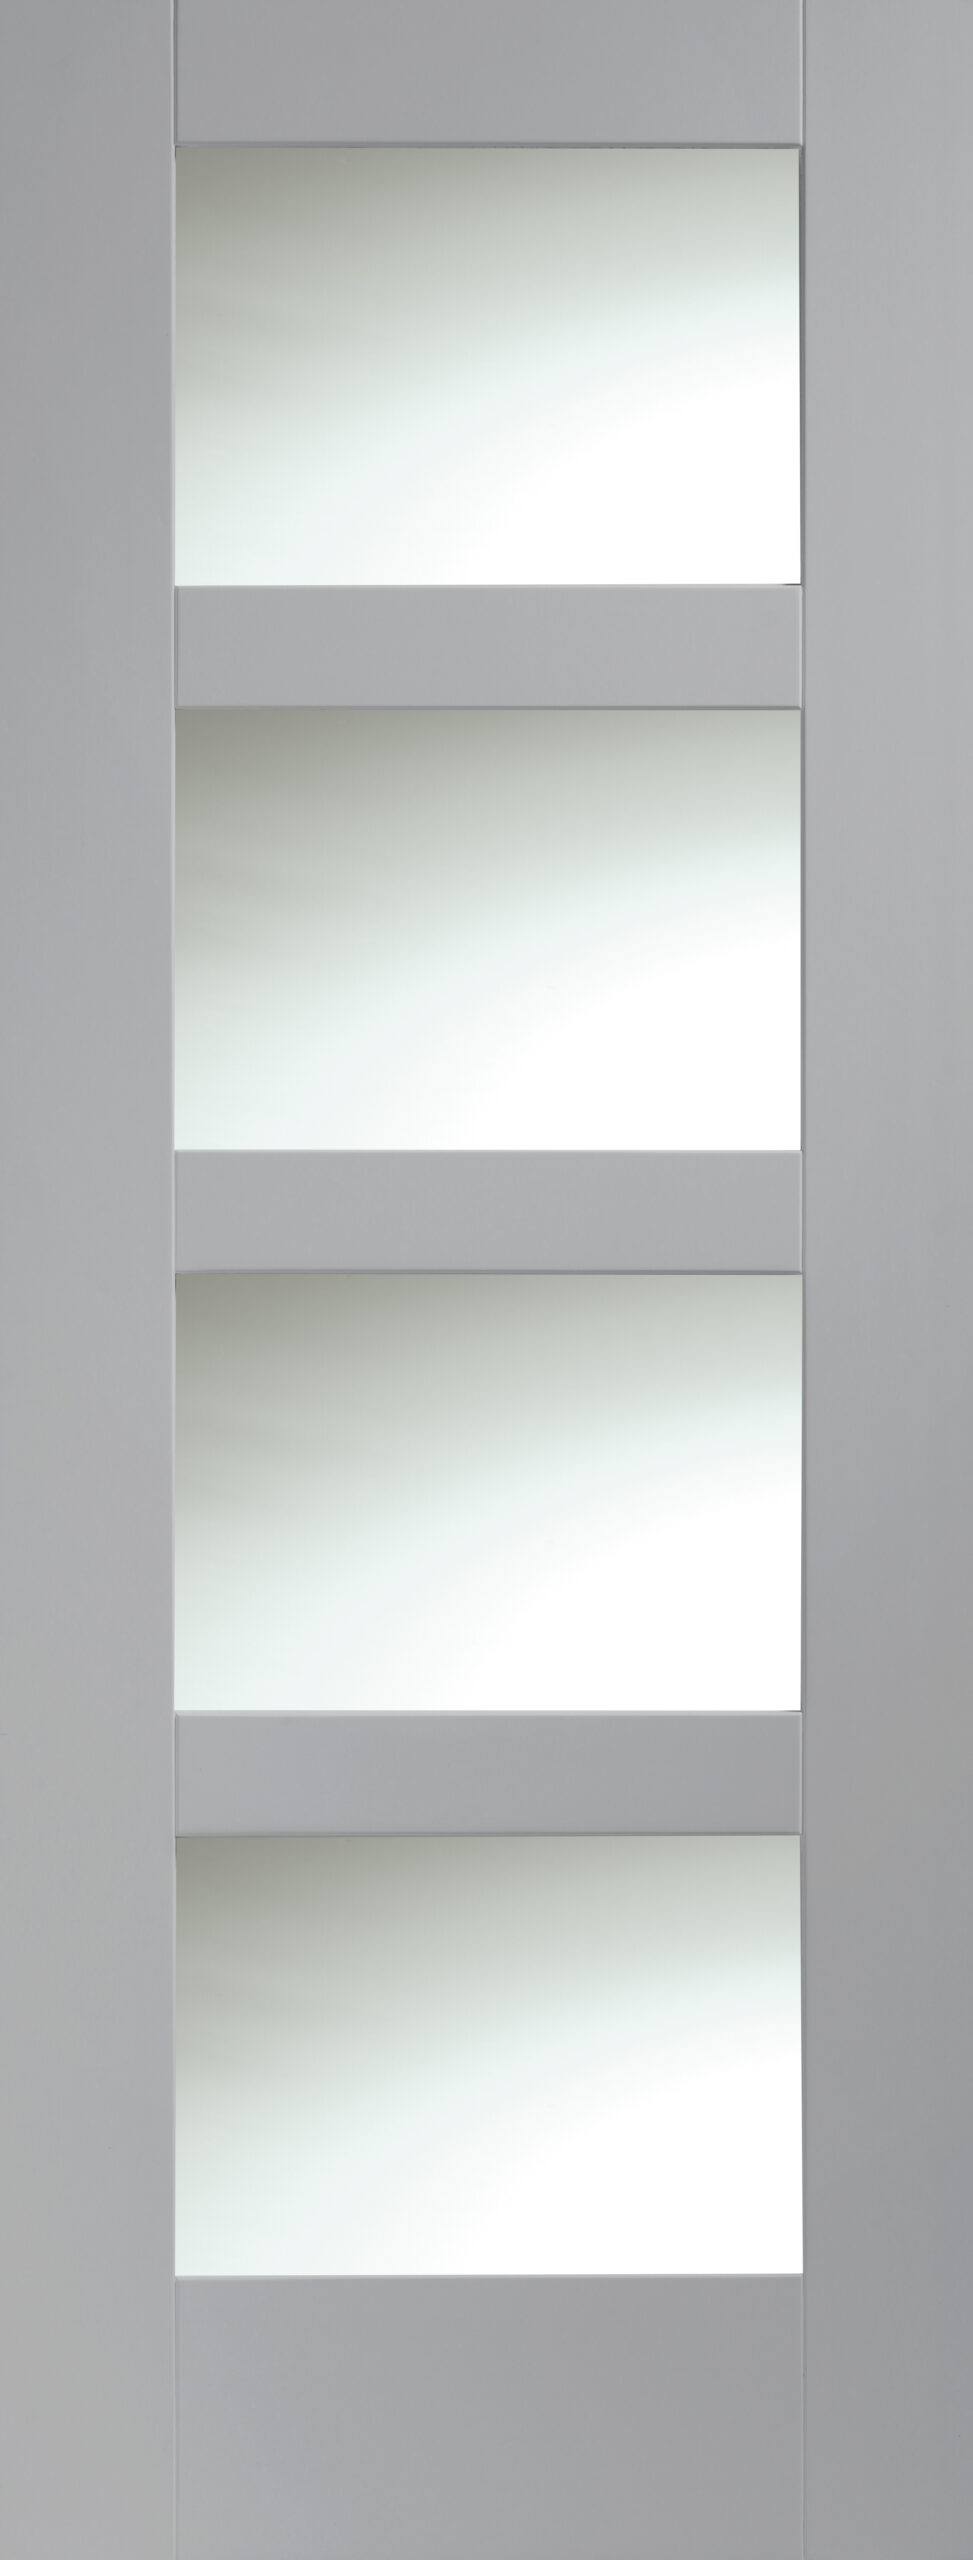 Shaker 4 Light Internal White Primed Fire Door with Clear Glass – 1981 x 686 x 44 mm, Storm